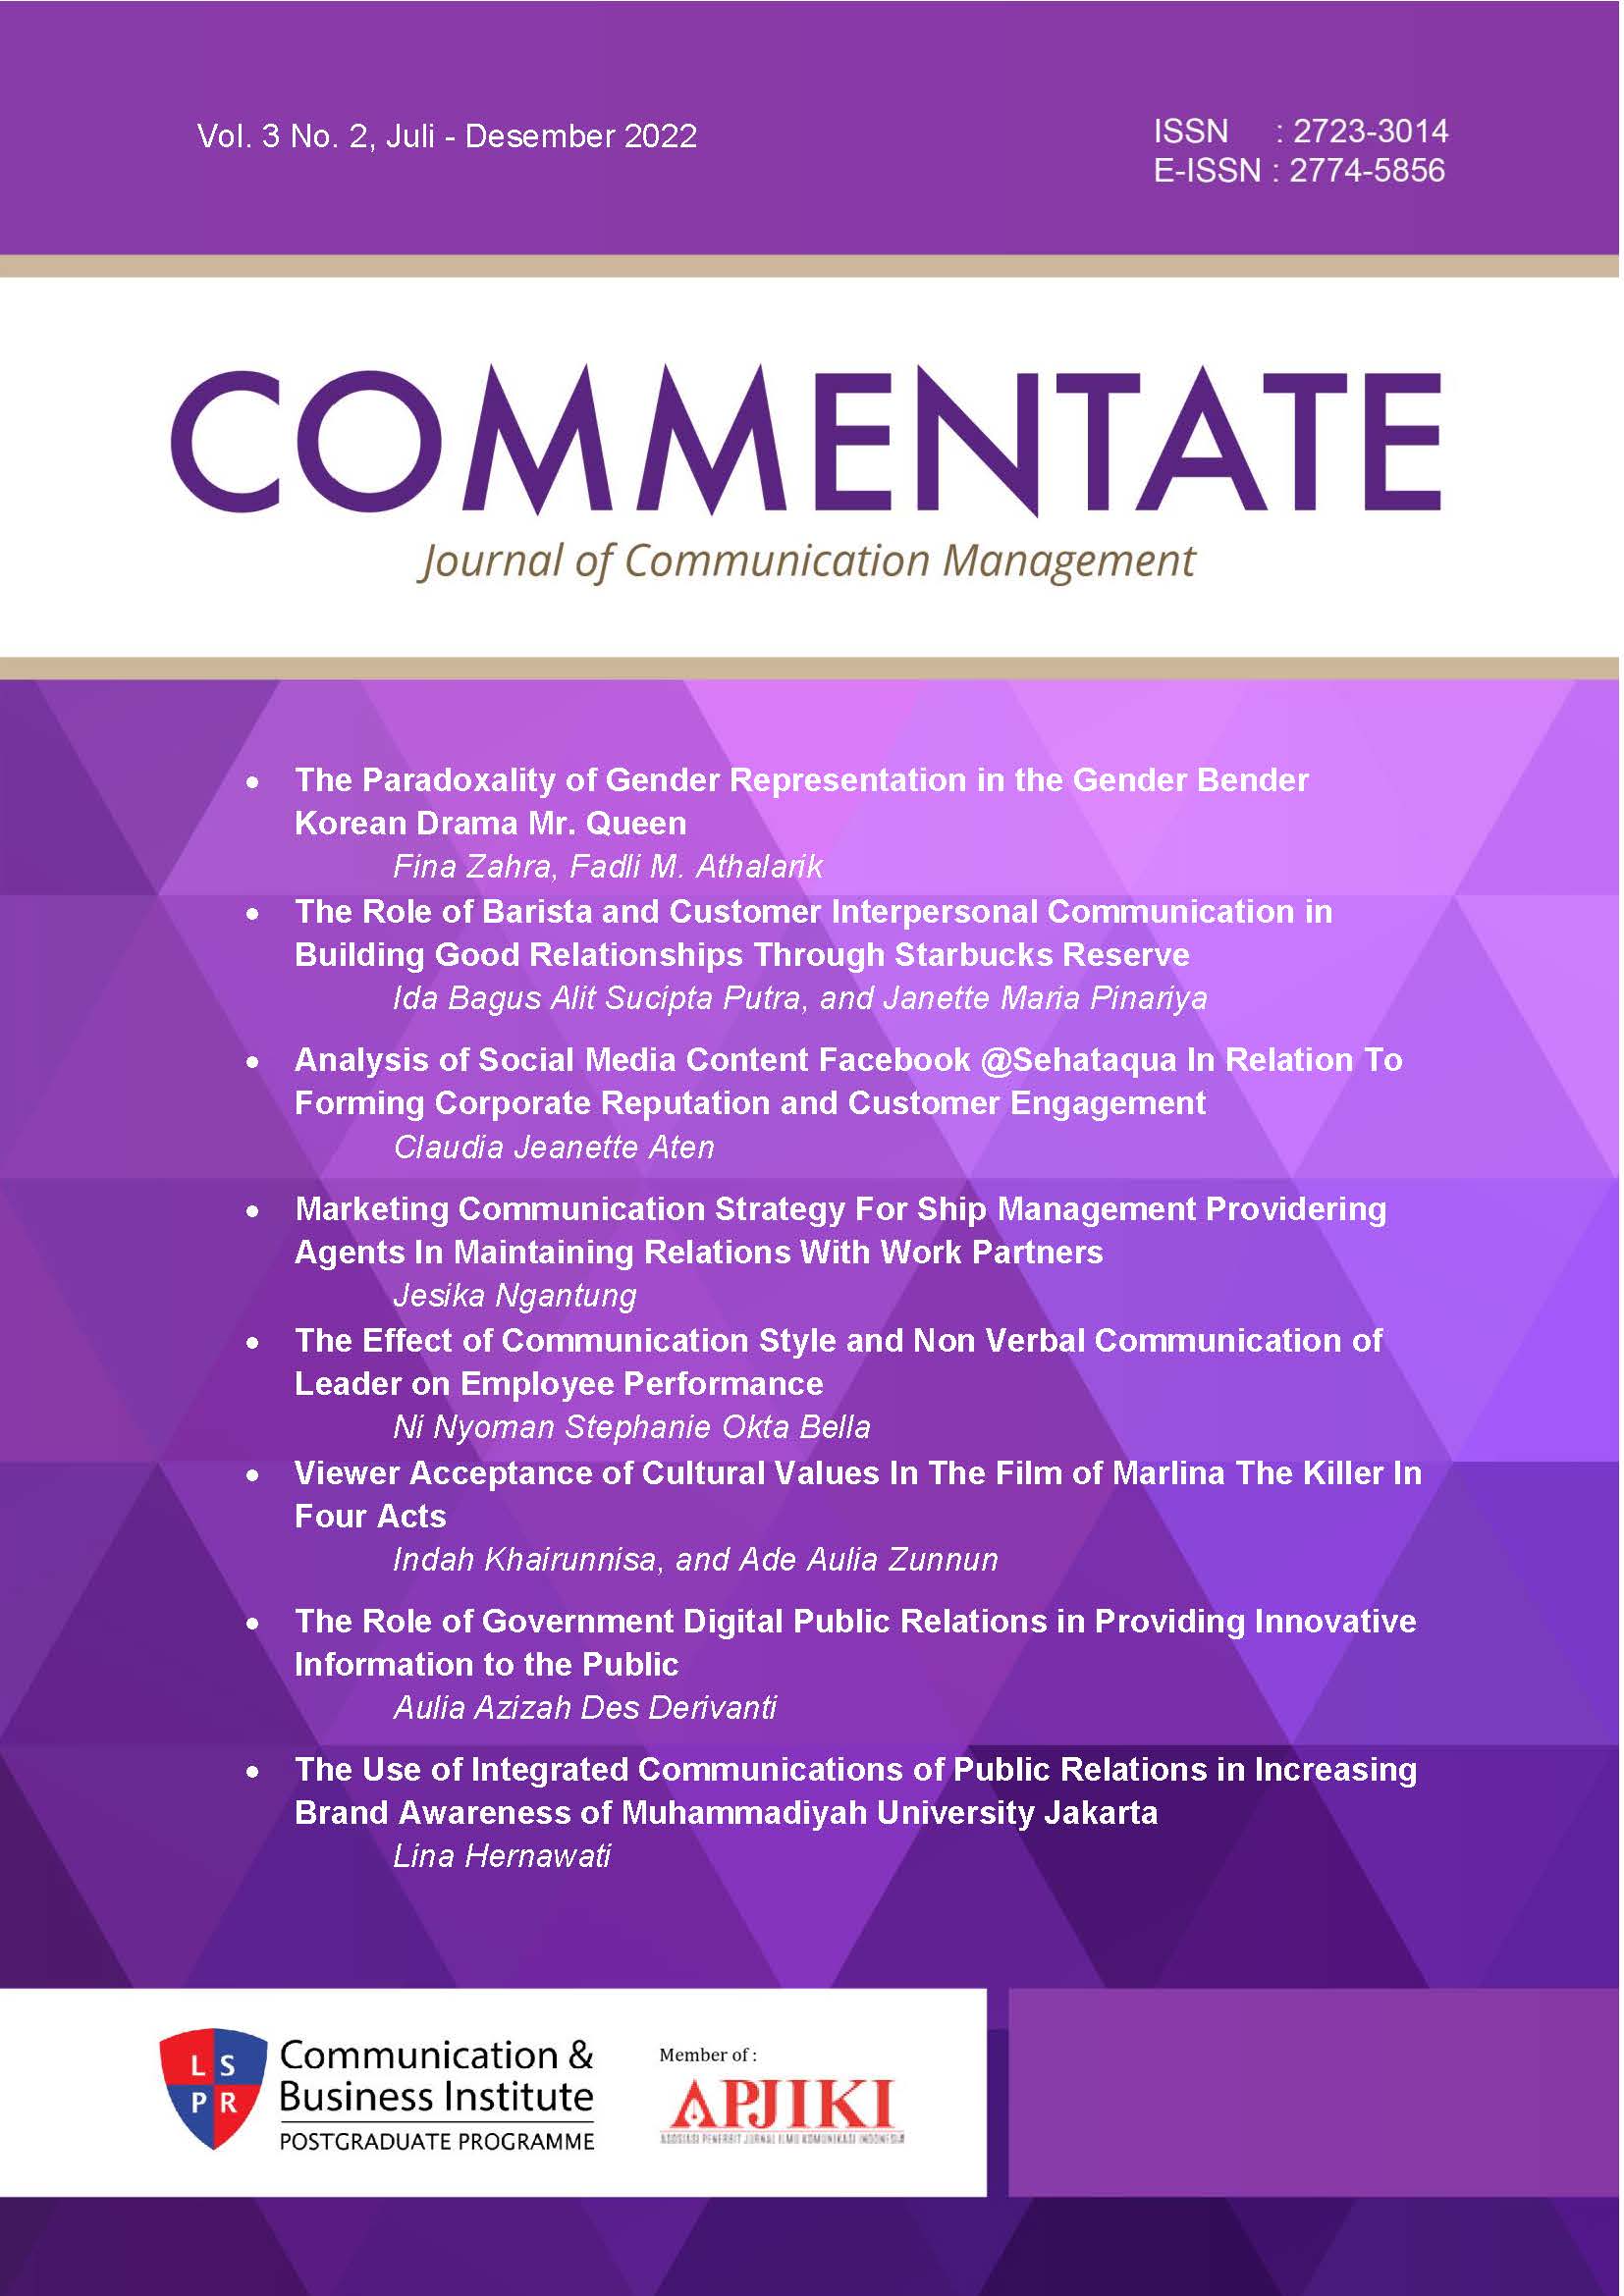 					View Vol. 3 No. 2 (2022): COMMENTATE: Journal of Communication Management
				